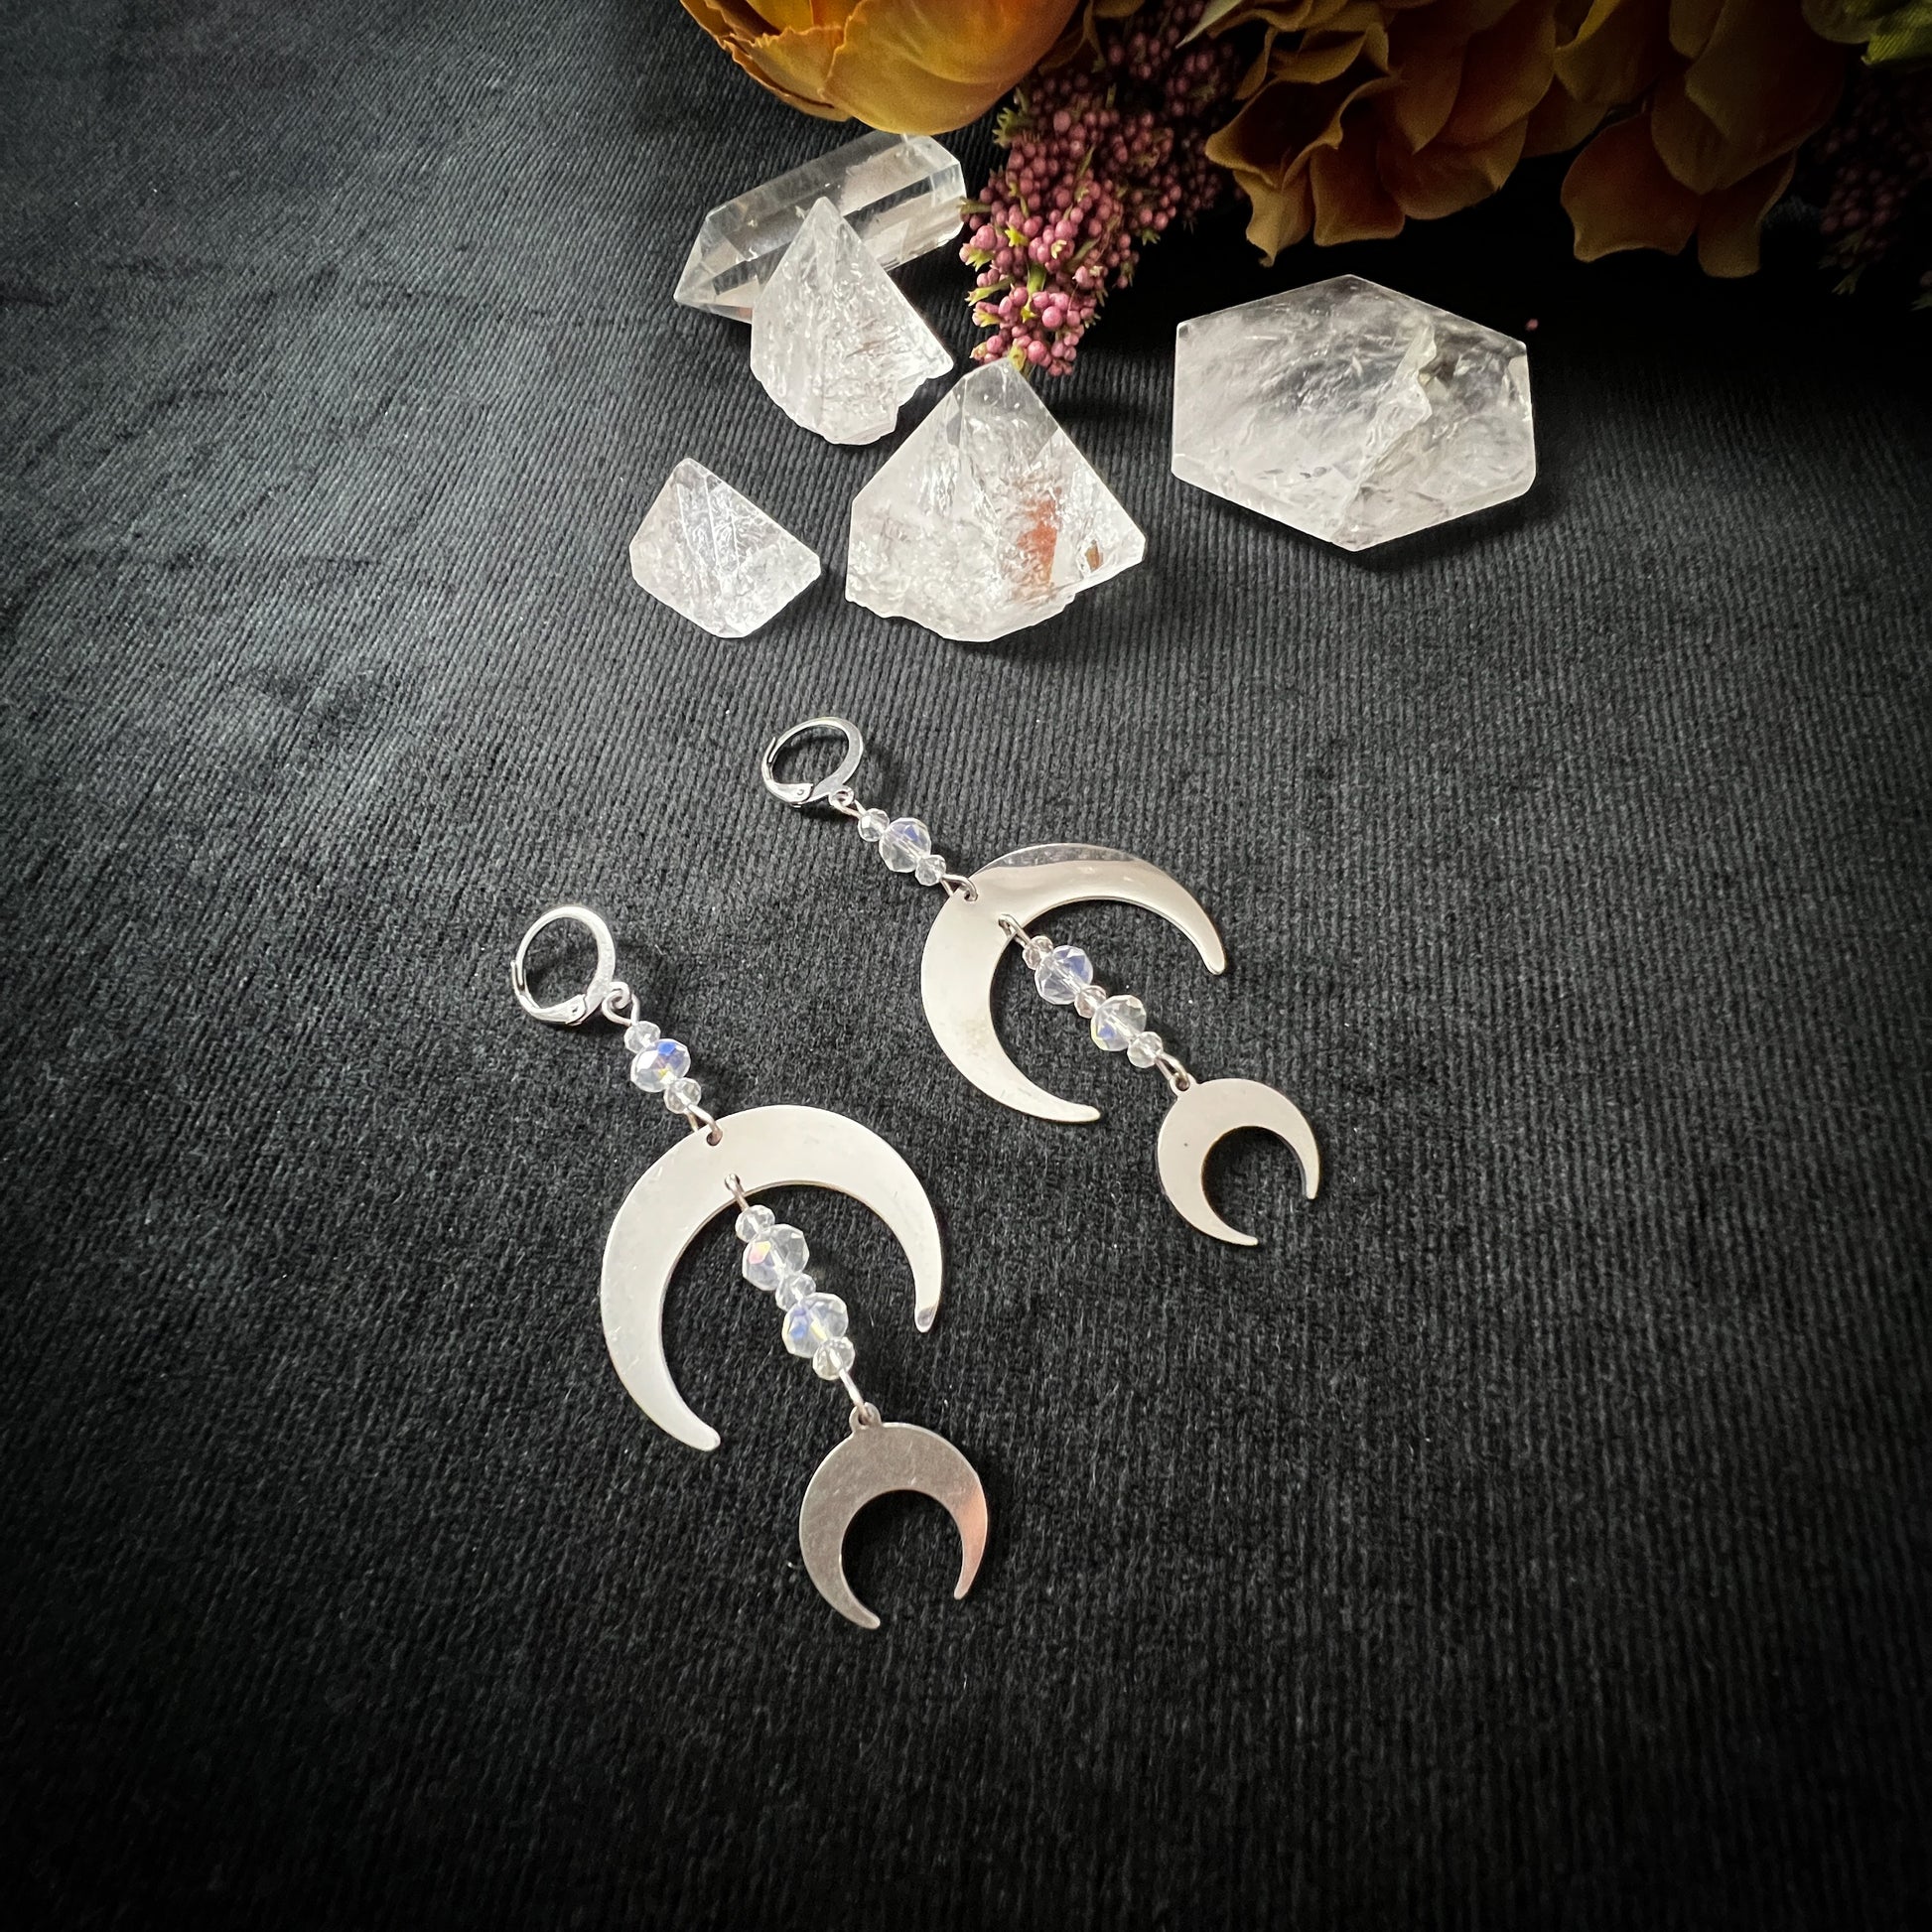 Moon crescents and crystals earrings made of stainless steel Baguette Magick